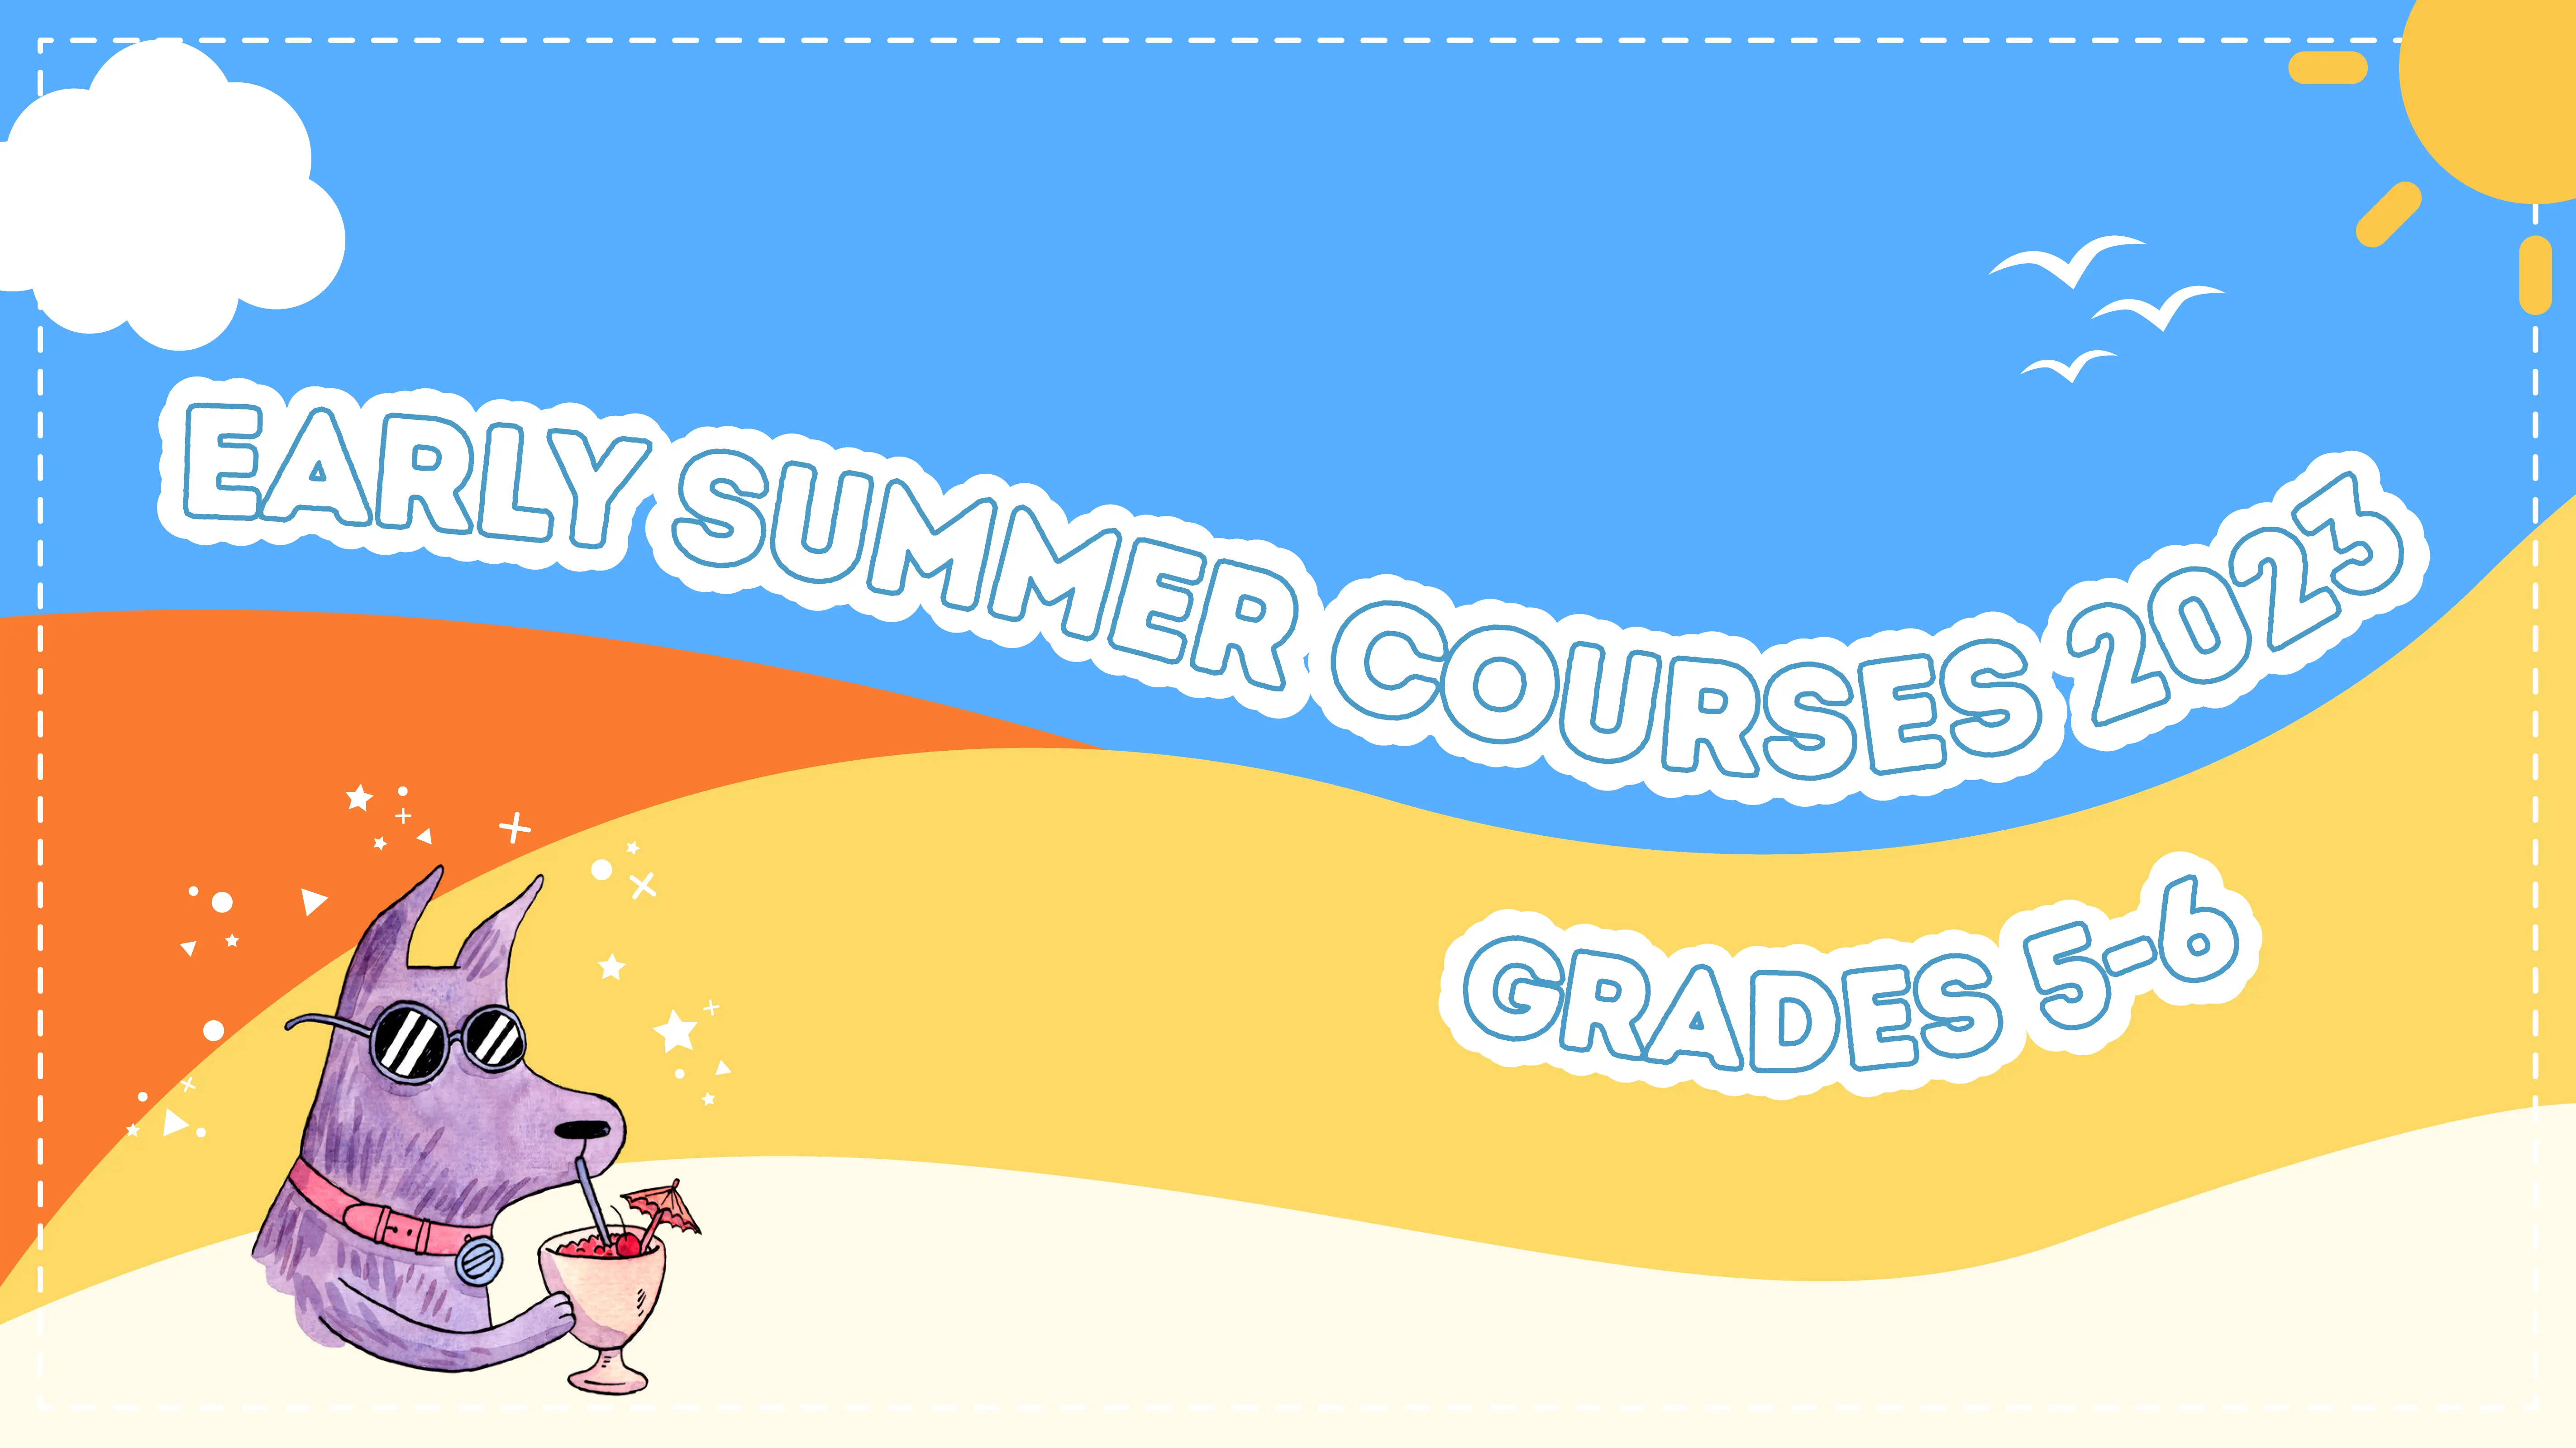 Early Summer Grades 5-6 Courses（中学受験準備コース）